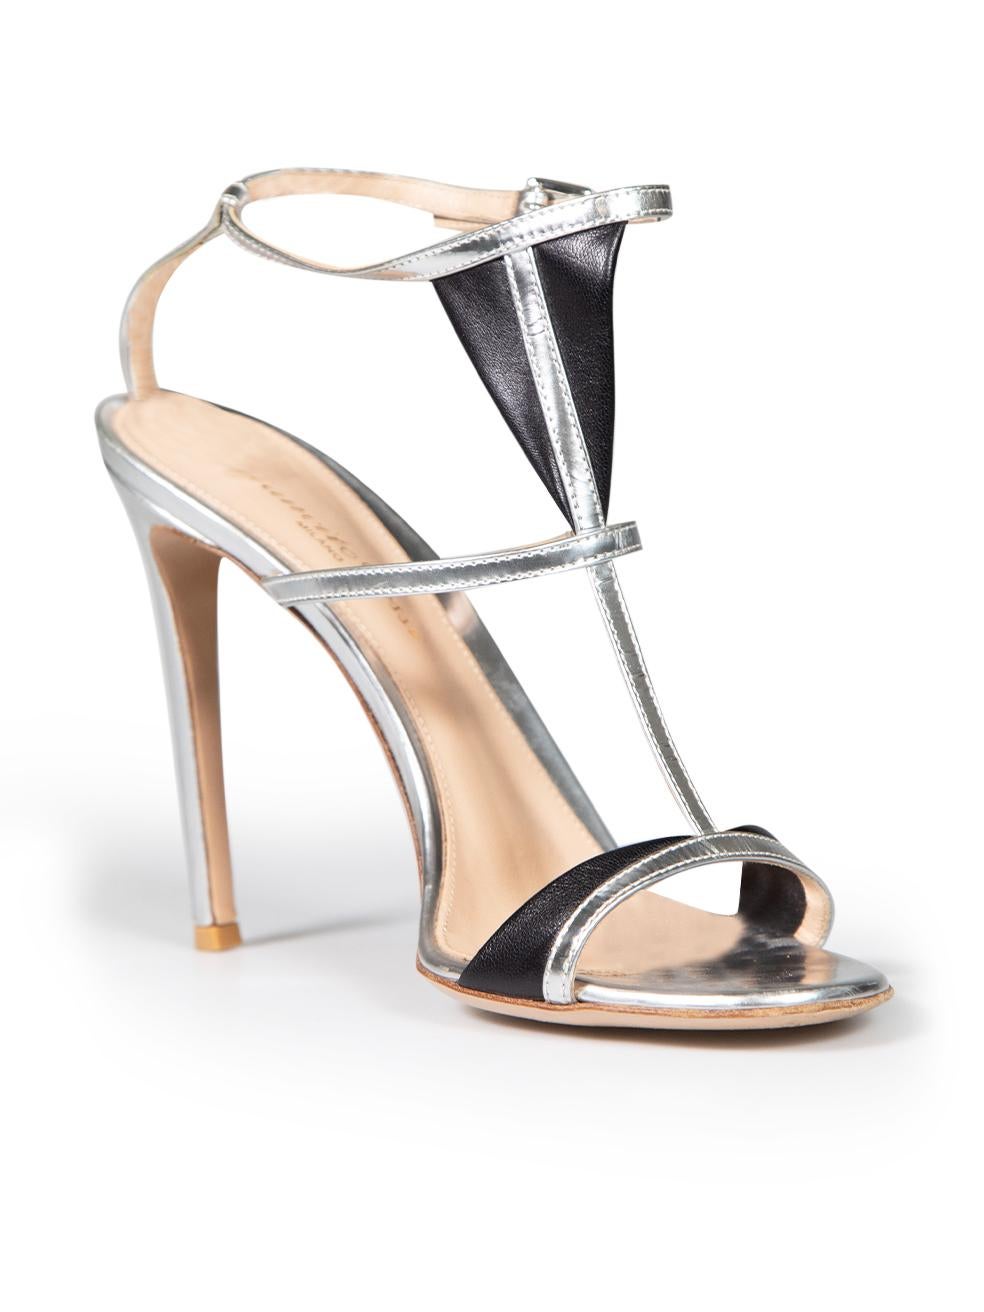 CONDITION is Good. Minor wear to shoes is evident. Light wear to back of heels with marks, wear to the insoles with some discolouration especially at the toes can be seen on this used Gianvito Rossi designer resale item.
 
 
 
 Details
 
 
 Silver
